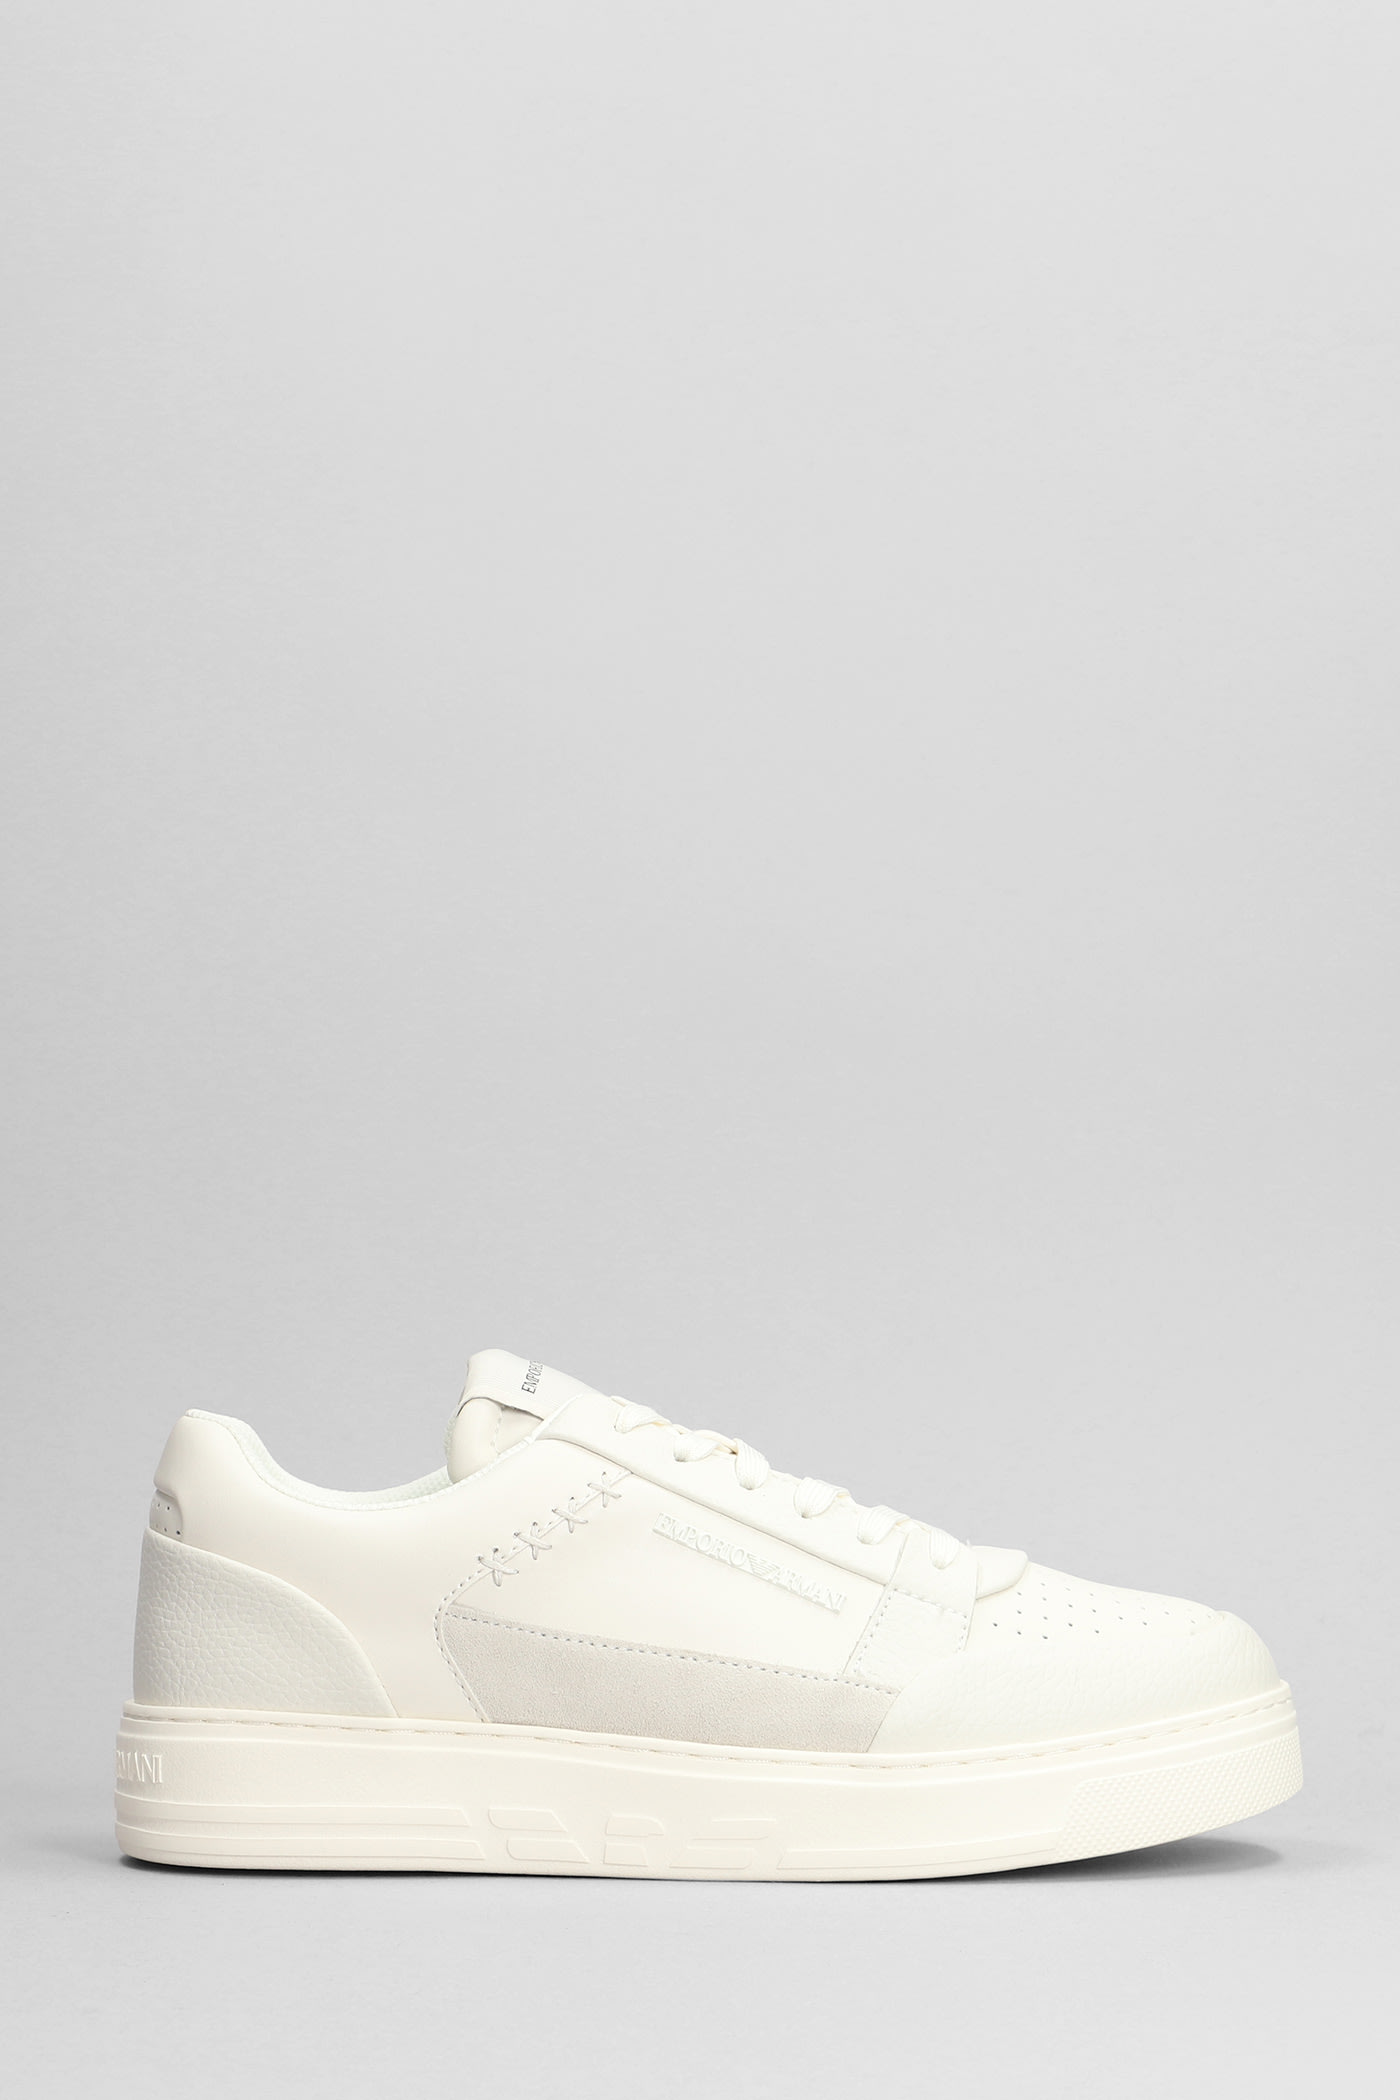 Emporio Armani Sneakers In Beige Suede And Leather